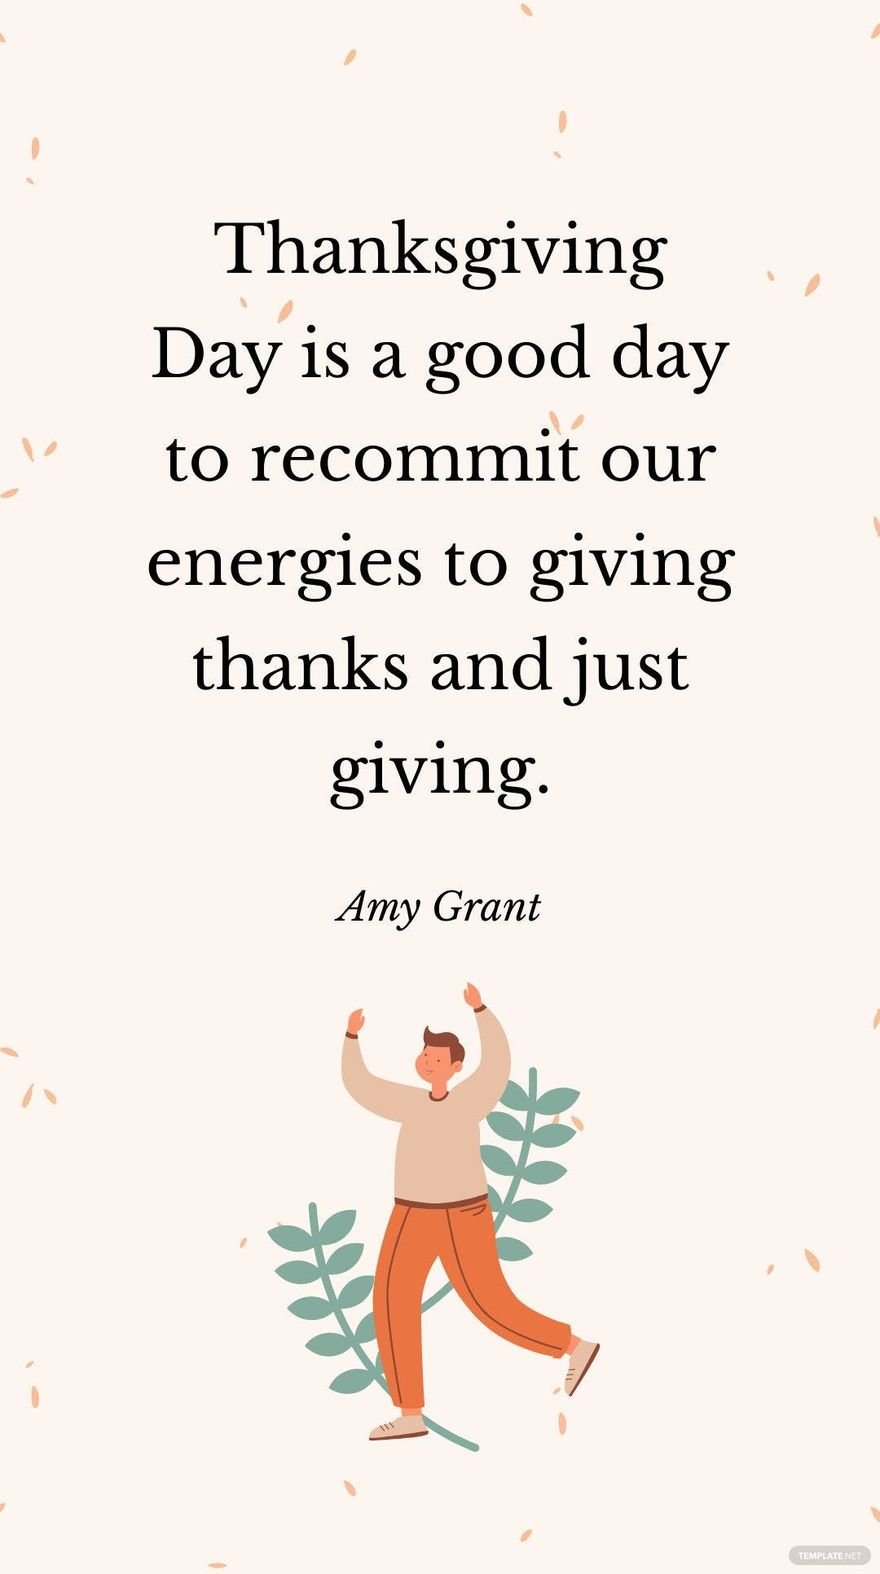 Free Amy Grant - Thanksgiving Day is a good day to recommit our energies to giving thanks and just giving. in JPG